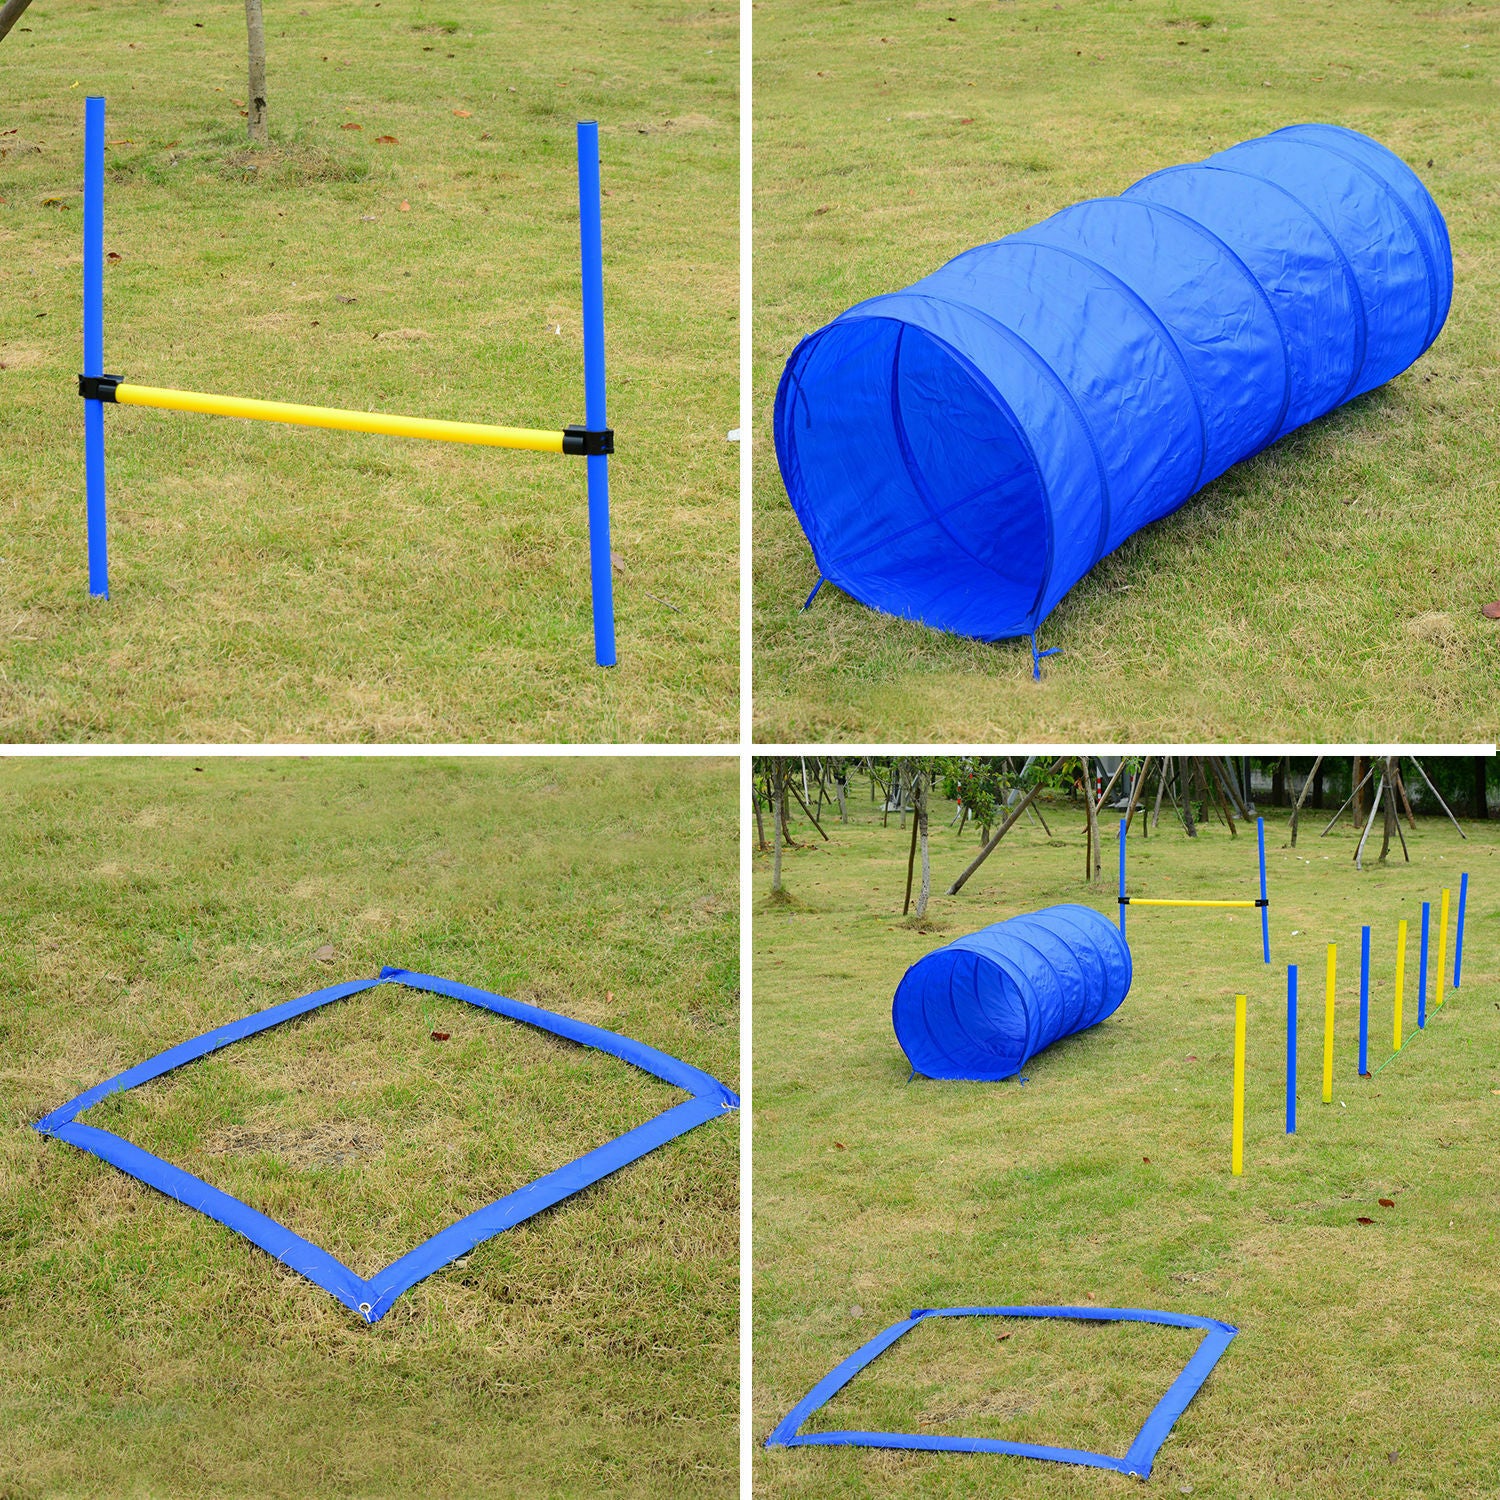 Dog Obstacle Course - Dog Agility Training Tools